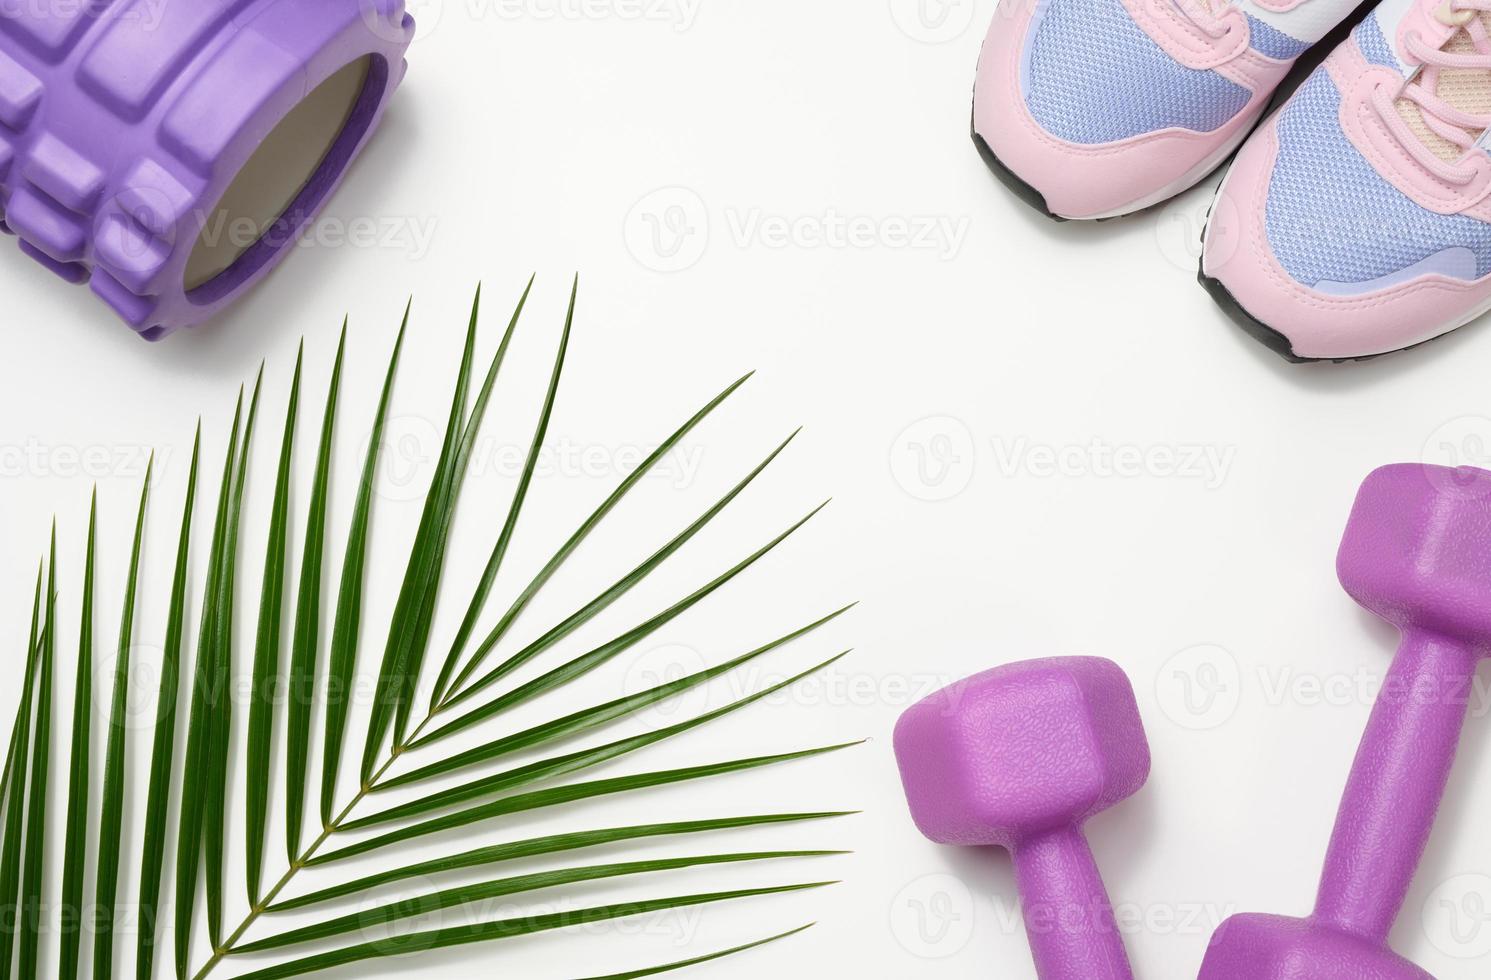 pair of pink sneakers and purple dumbbells on a white background, sports photo